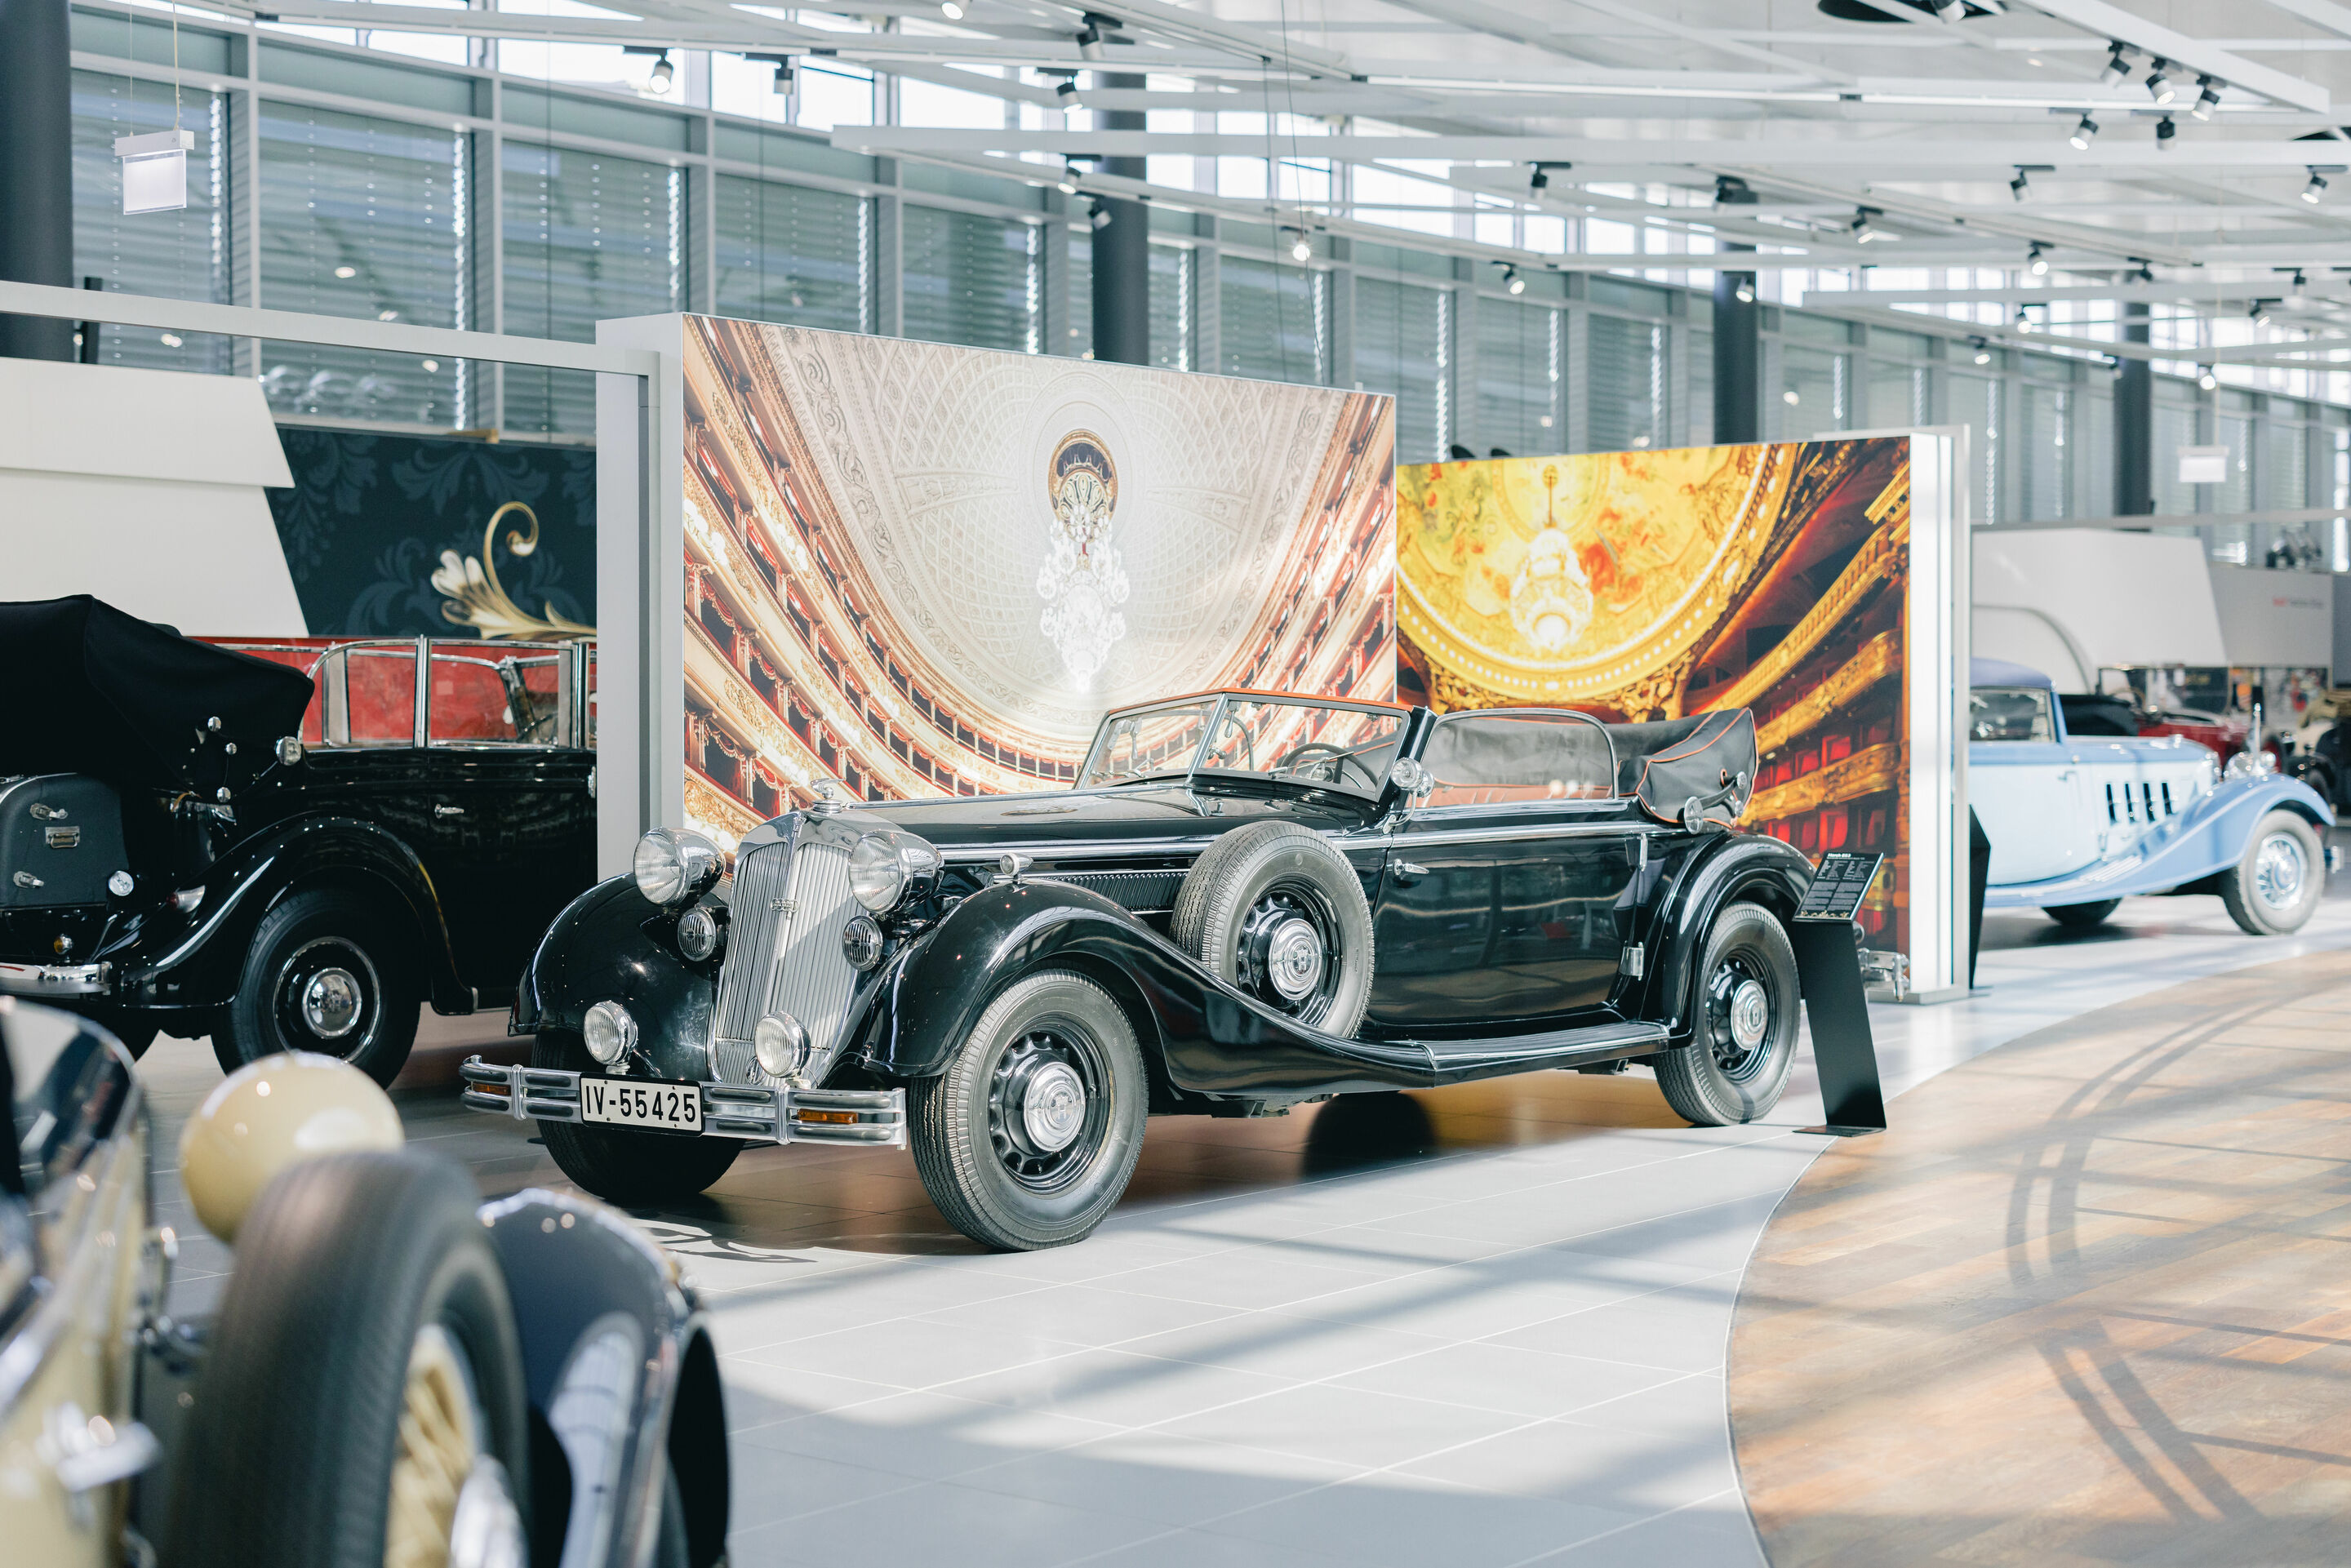 Grand Opera: New Audi Tradition exhibition “125 years of Horch”